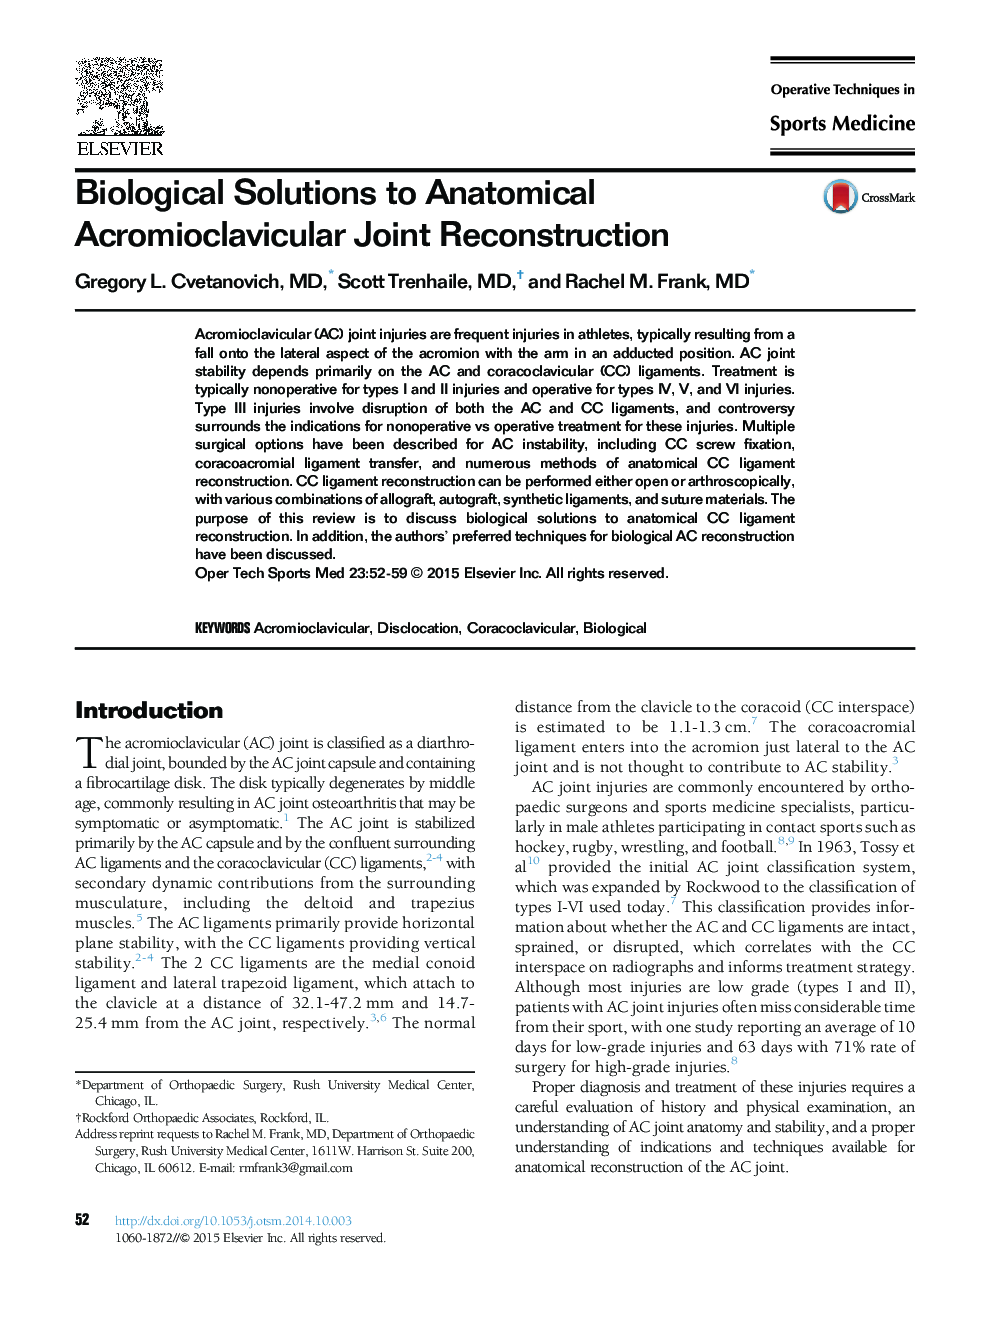 Biological Solutions to Anatomical Acromioclavicular Joint Reconstruction